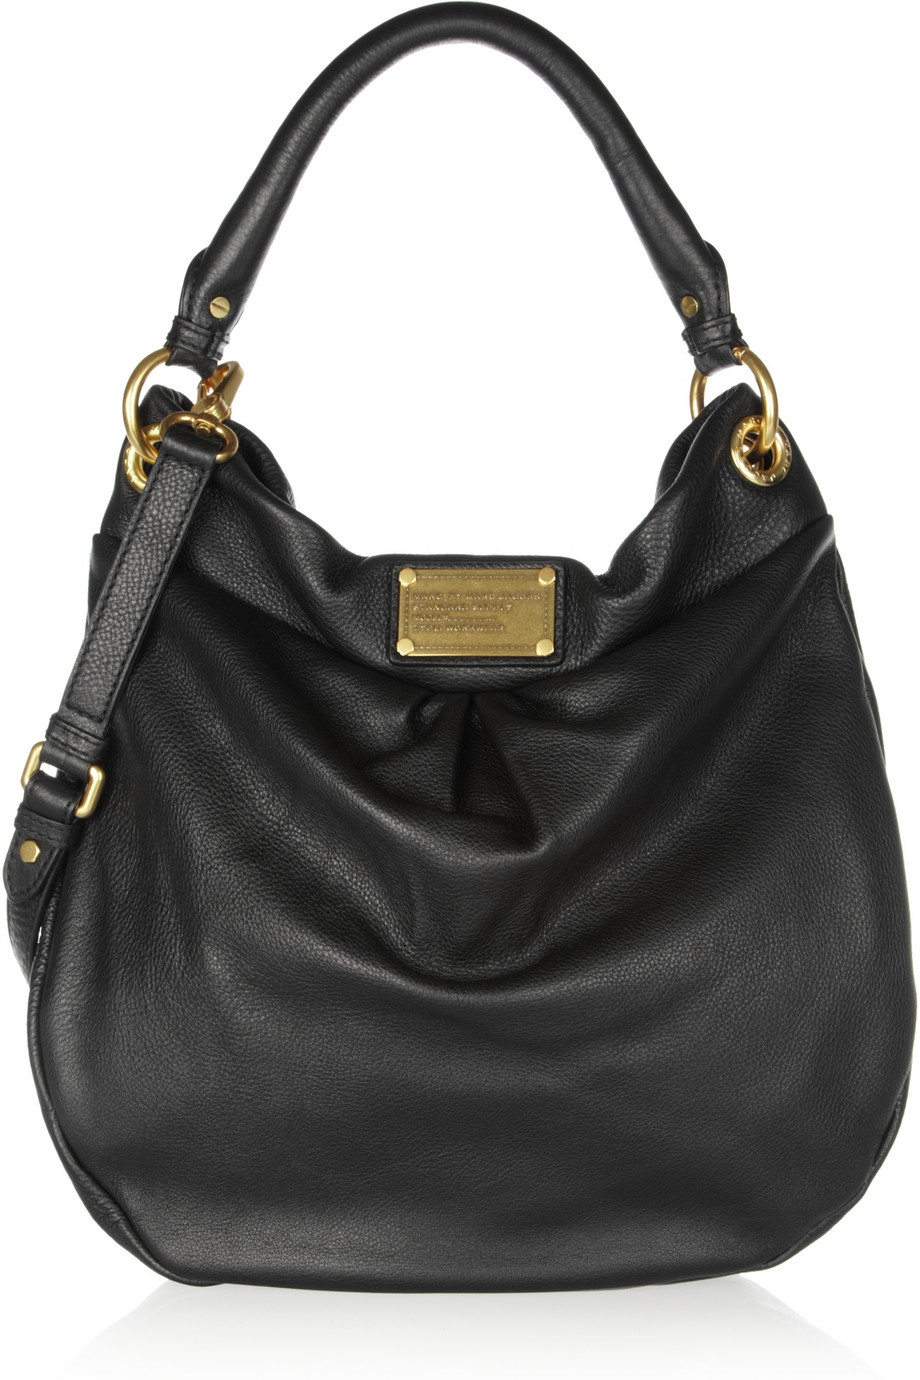 Marc Jacobs Hobo Bag Black Leather | The Art of Mike Mignola